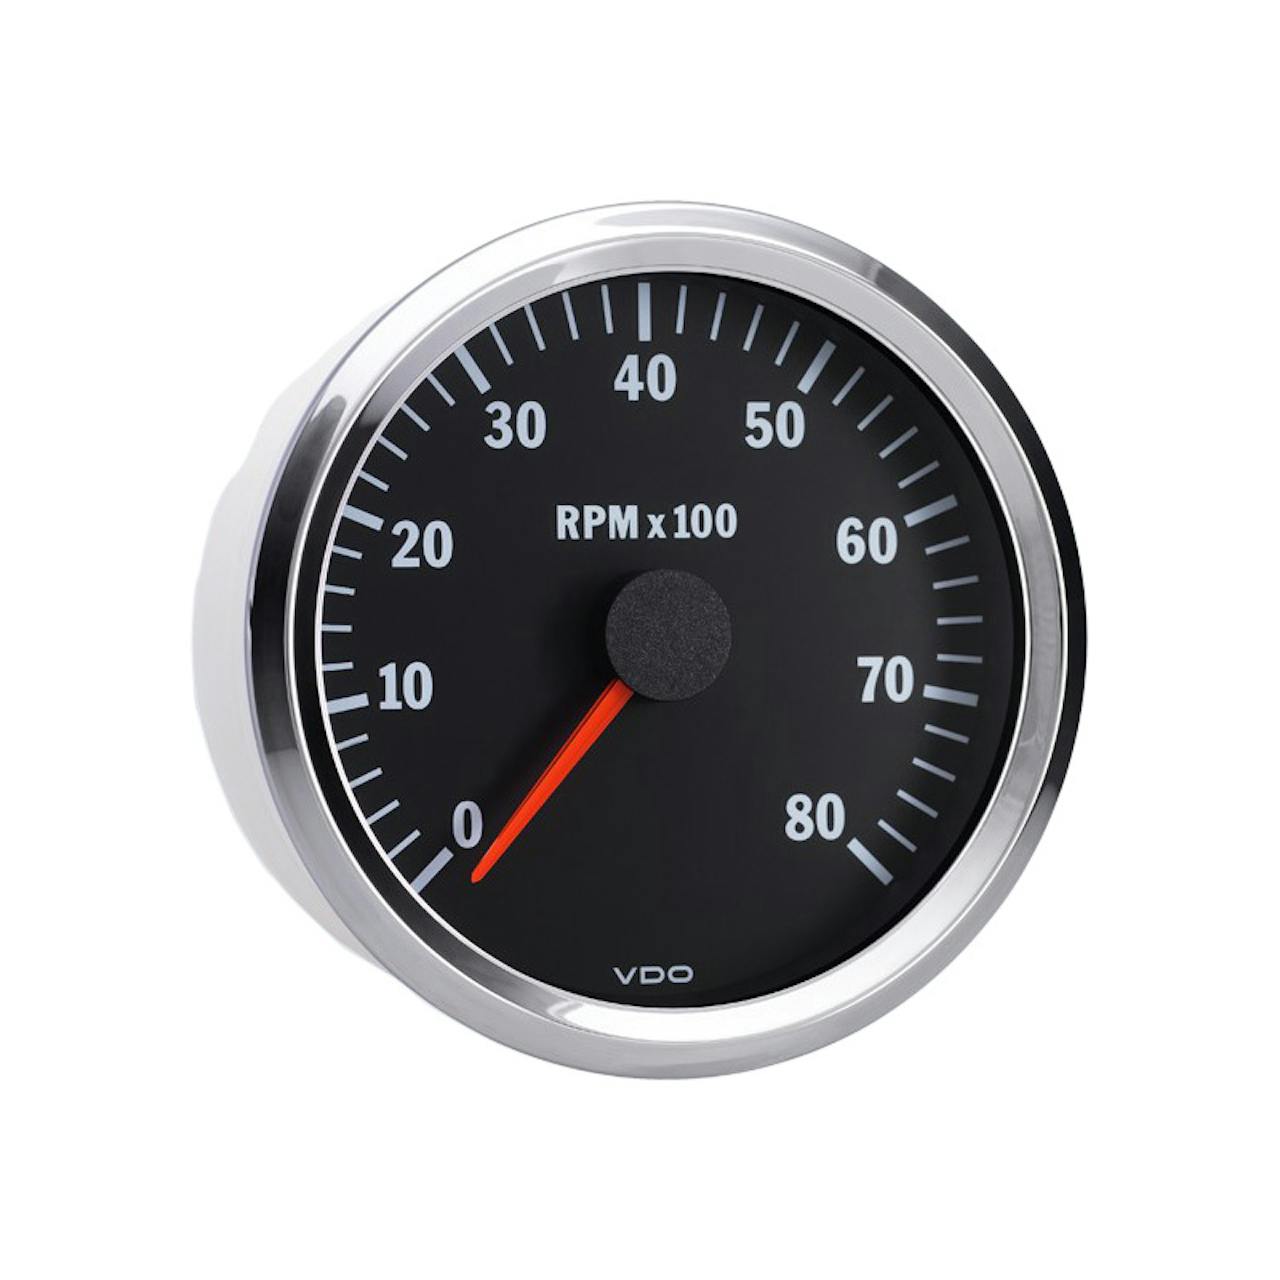 https://raneys-cdn11.imgix.net/images/stencil/original/products/192704/89953/Semi_Truck_Electrical_Programmable_Tachometer_Gauge_Vision_Chrome_8000_RPM_333_199__91265.1429556333.jpg?auto=compress,format&w=1280